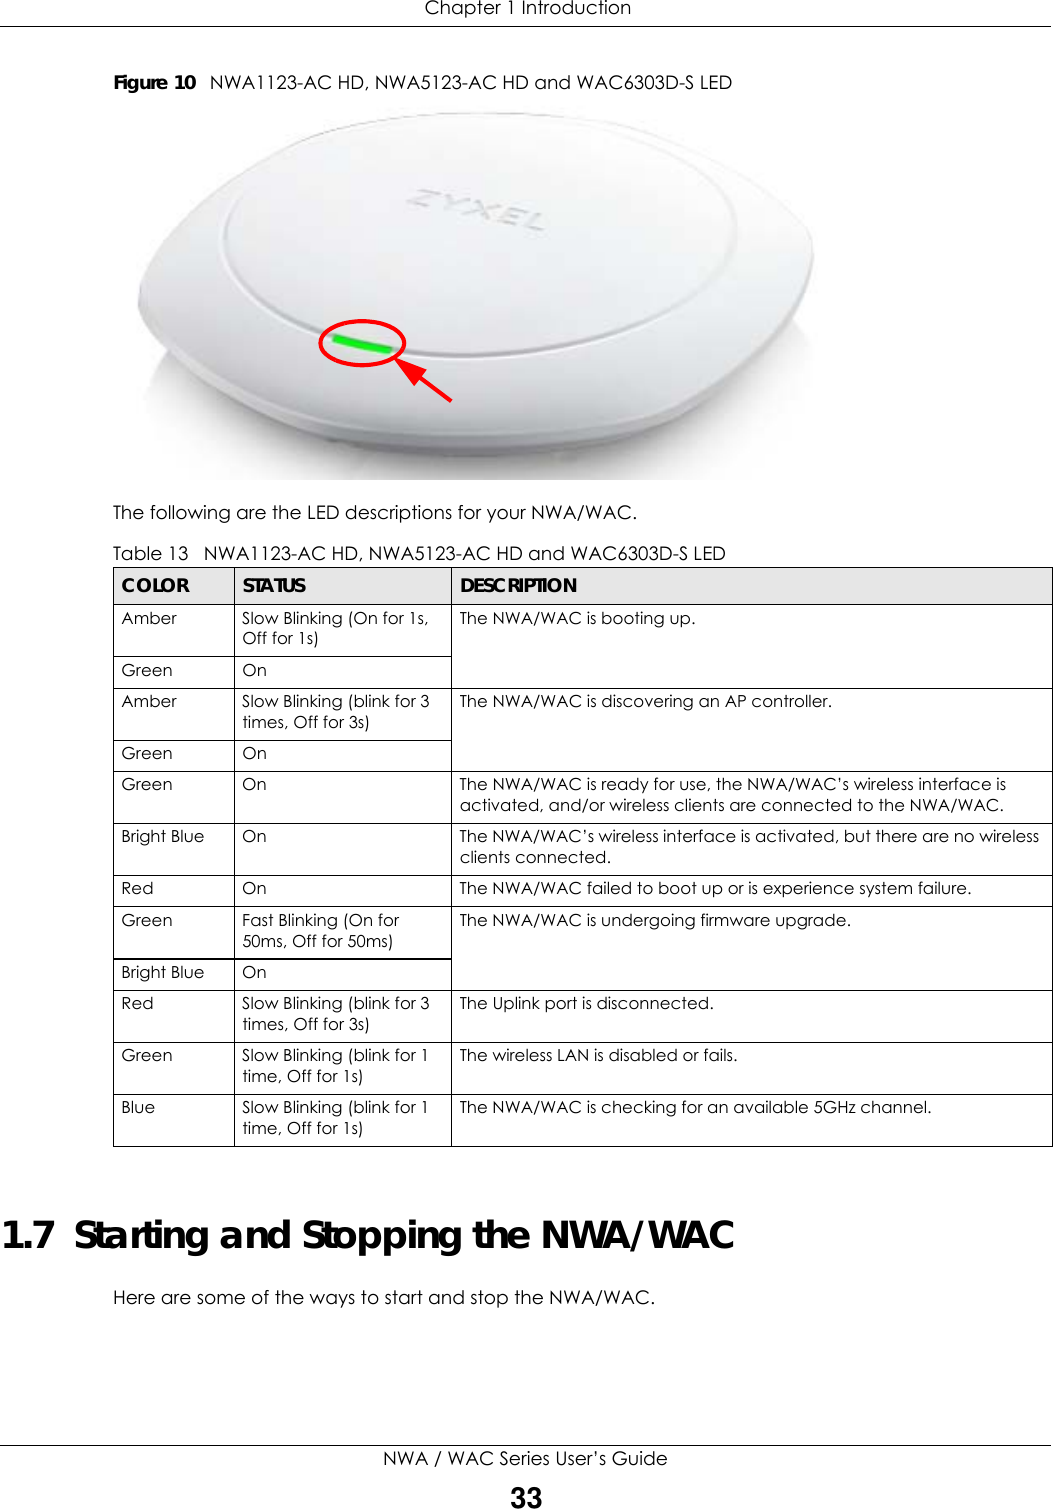  Chapter 1 IntroductionNWA / WAC Series User’s Guide33Figure 10   NWA1123-AC HD, NWA5123-AC HD and WAC6303D-S LED  The following are the LED descriptions for your NWA/WAC. 1.7  Starting and Stopping the NWA/WACHere are some of the ways to start and stop the NWA/WAC.Table 13   NWA1123-AC HD, NWA5123-AC HD and WAC6303D-S LEDCOLOR STATUS DESCRIPTIONAmber Slow Blinking (On for 1s, Off for 1s)The NWA/WAC is booting up.Green On Amber Slow Blinking (blink for 3 times, Off for 3s)The NWA/WAC is discovering an AP controller.Green OnGreen On The NWA/WAC is ready for use, the NWA/WAC’s wireless interface is activated, and/or wireless clients are connected to the NWA/WAC.Bright Blue On The NWA/WAC’s wireless interface is activated, but there are no wireless clients connected.Red On The NWA/WAC failed to boot up or is experience system failure.Green Fast Blinking (On for 50ms, Off for 50ms)The NWA/WAC is undergoing firmware upgrade.Bright Blue OnRed Slow Blinking (blink for 3 times, Off for 3s)The Uplink port is disconnected.Green Slow Blinking (blink for 1 time, Off for 1s)The wireless LAN is disabled or fails.Blue Slow Blinking (blink for 1 time, Off for 1s)The NWA/WAC is checking for an available 5GHz channel.